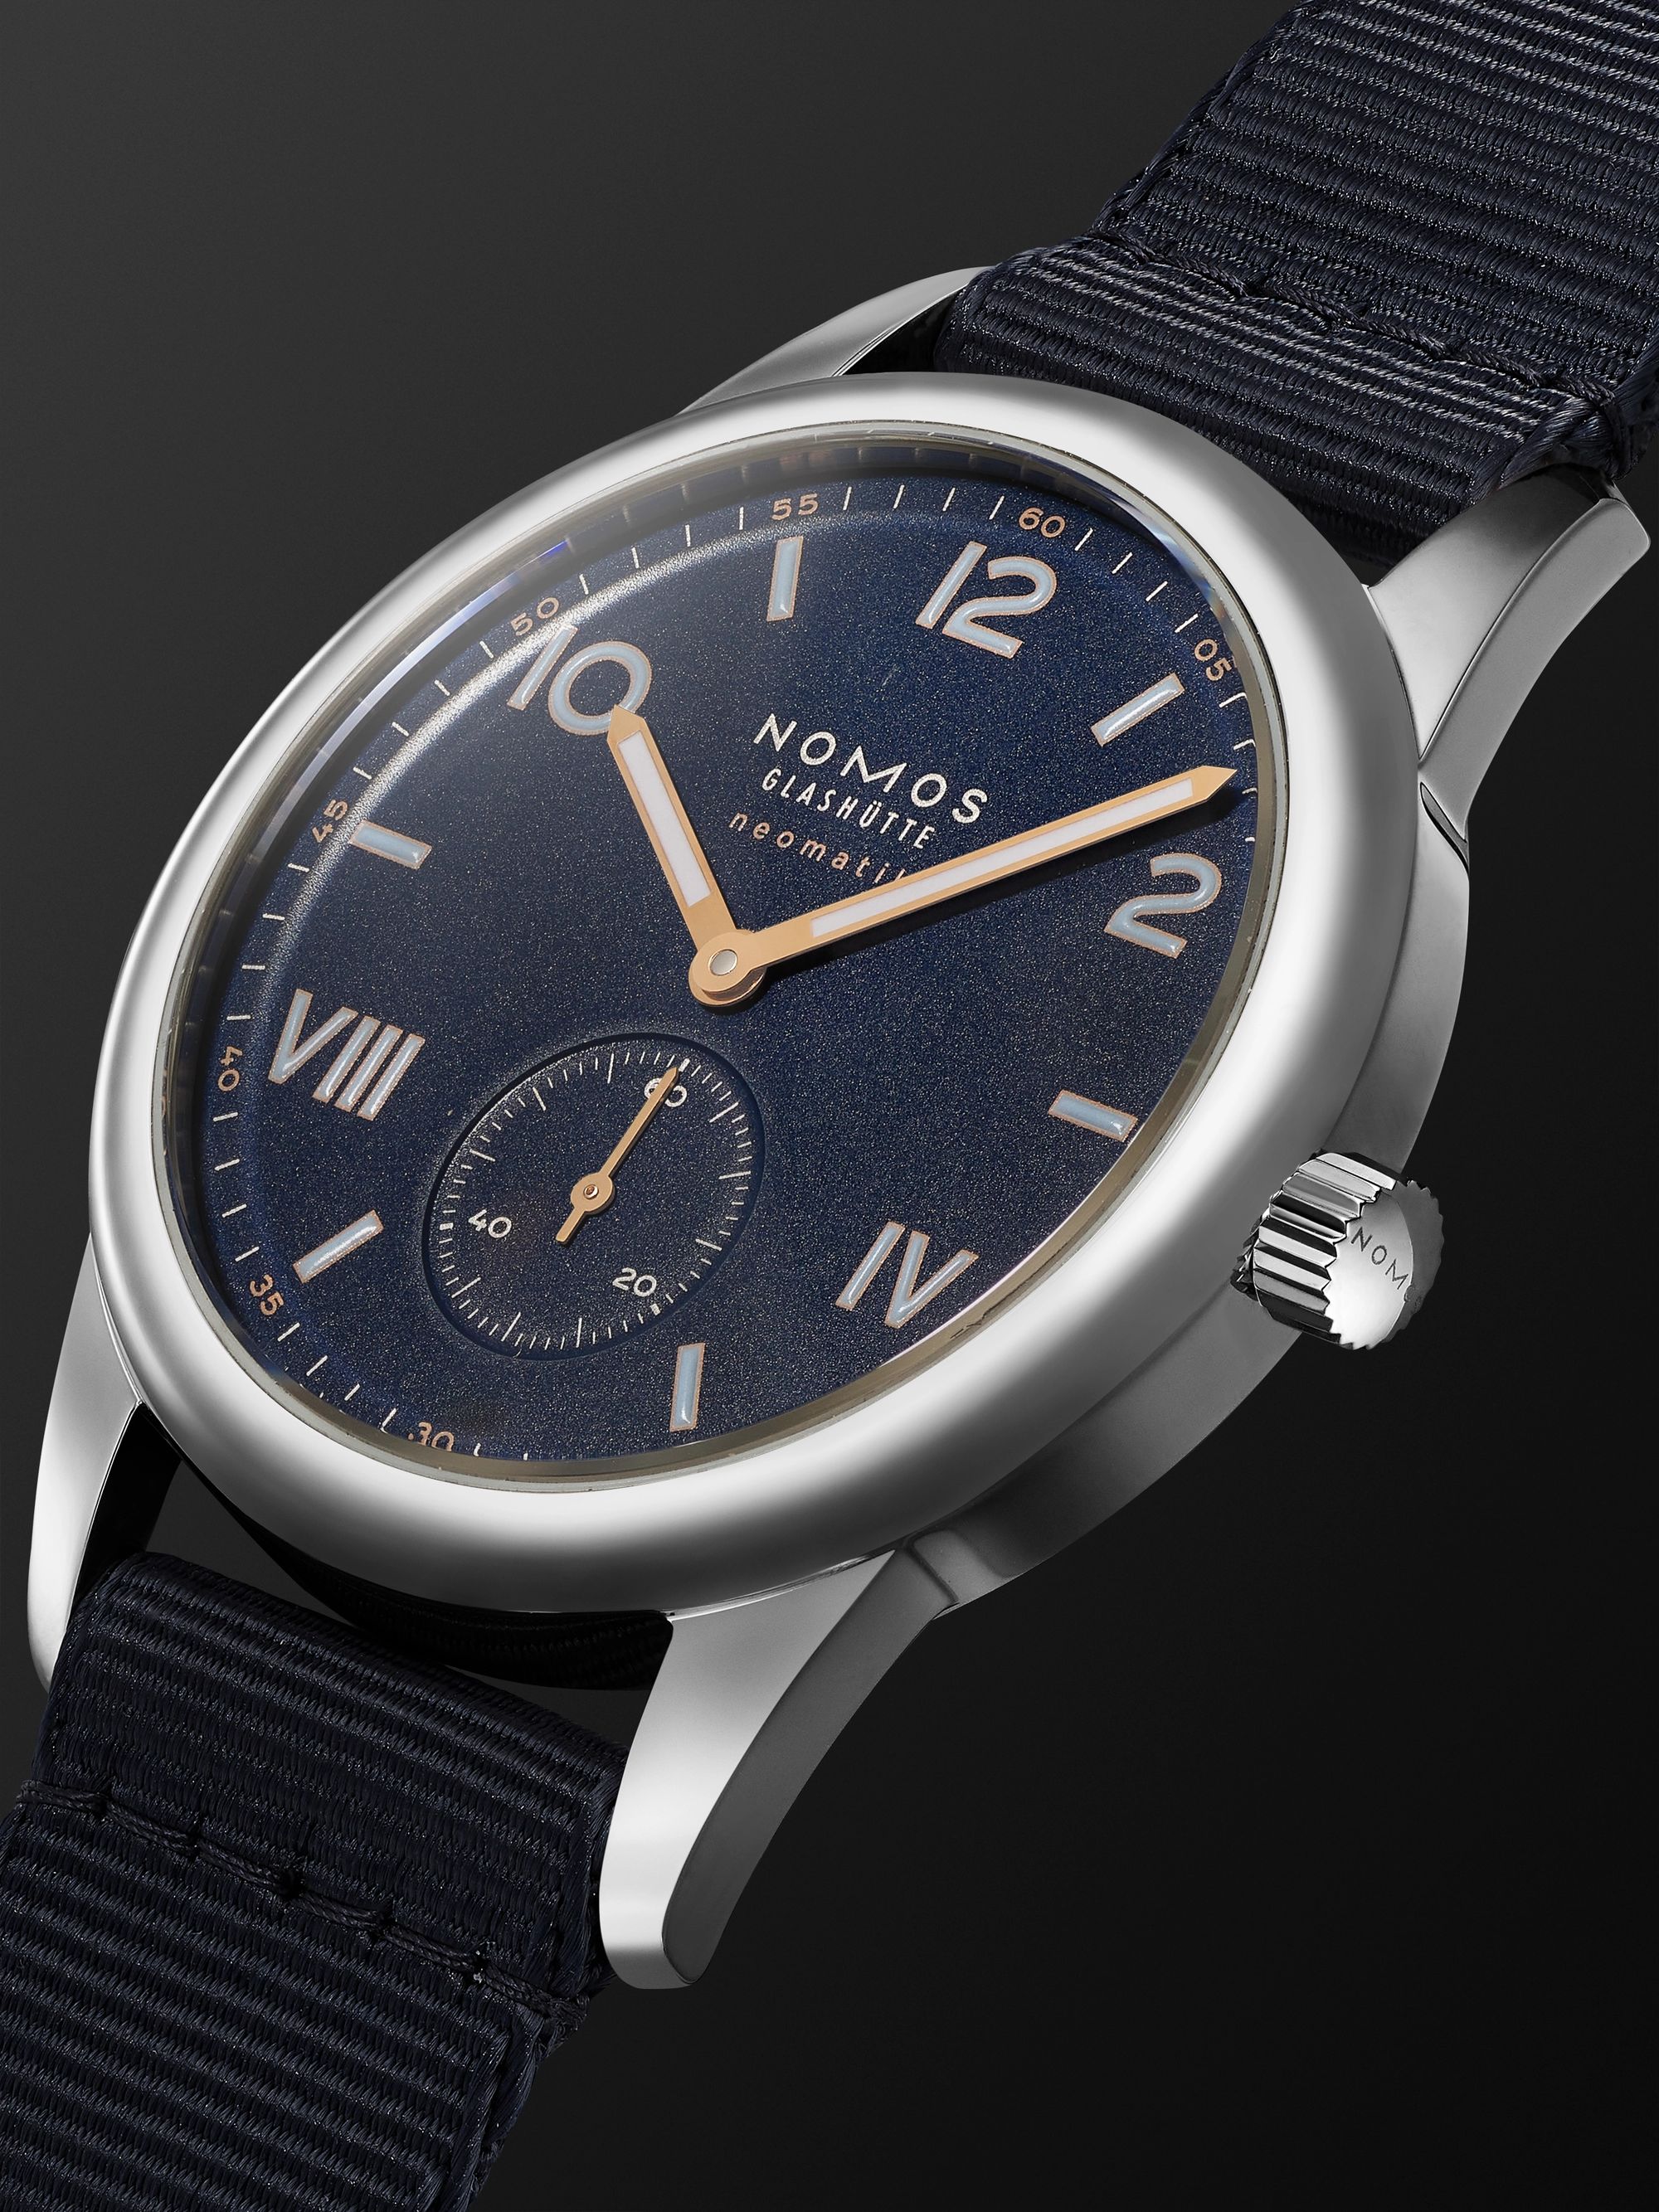 NOMOS GLASHÜTTE Club Campus Neomatik Automatic 39.5mm Stainless Steel and Canvas Watch, Ref. No. 767